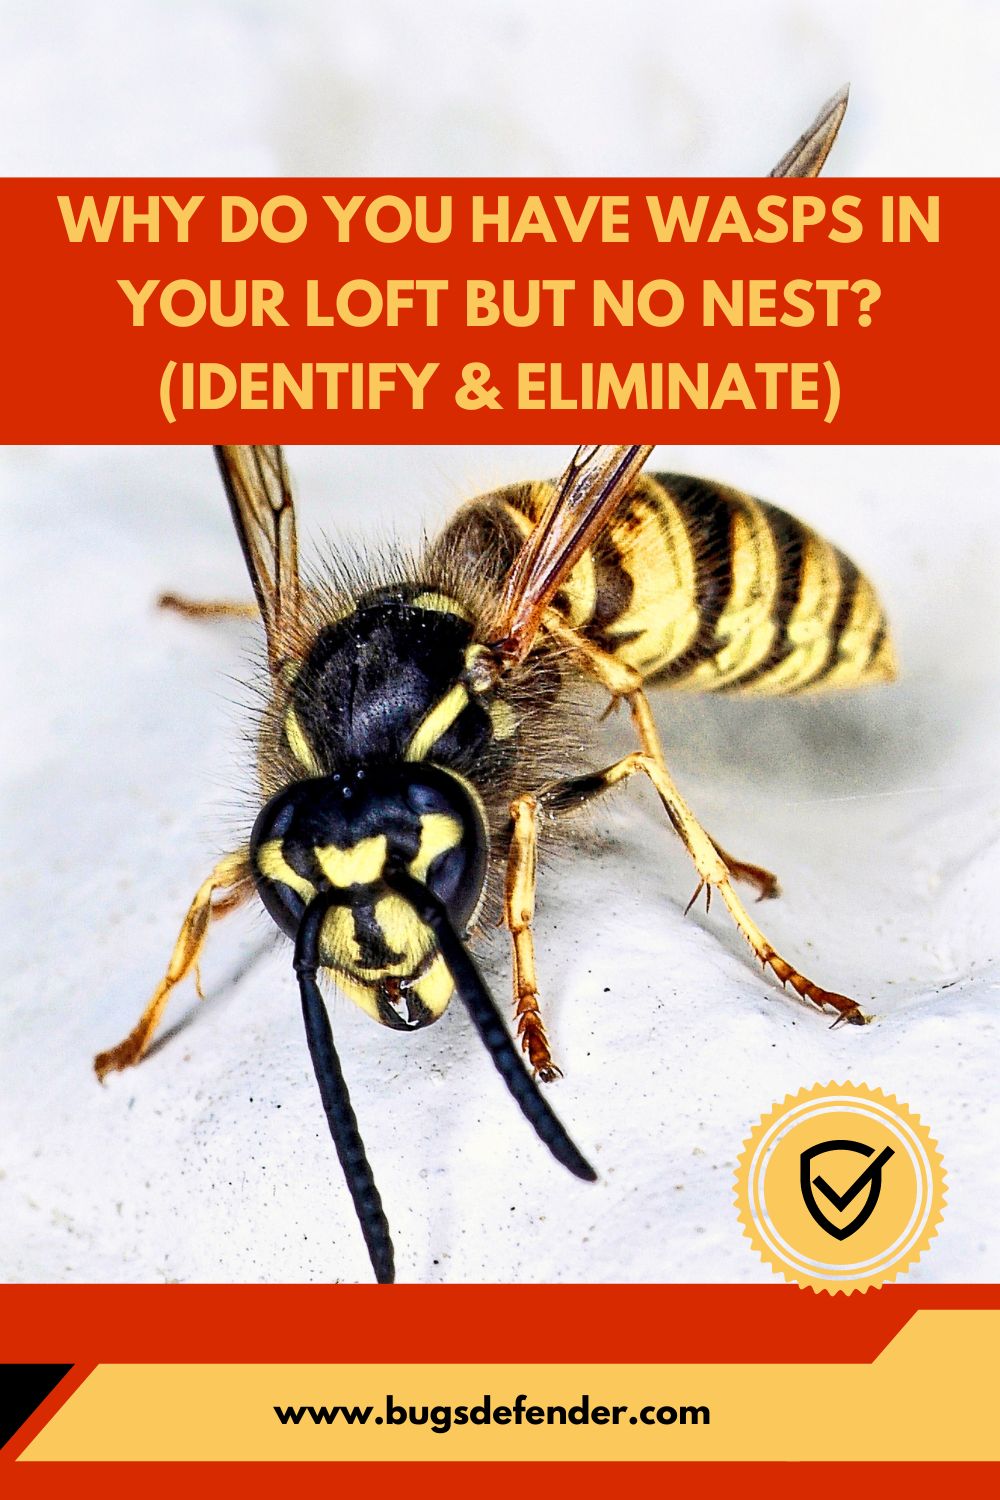 Why Do You Have Wasps in Your Loft but No Nest pin2